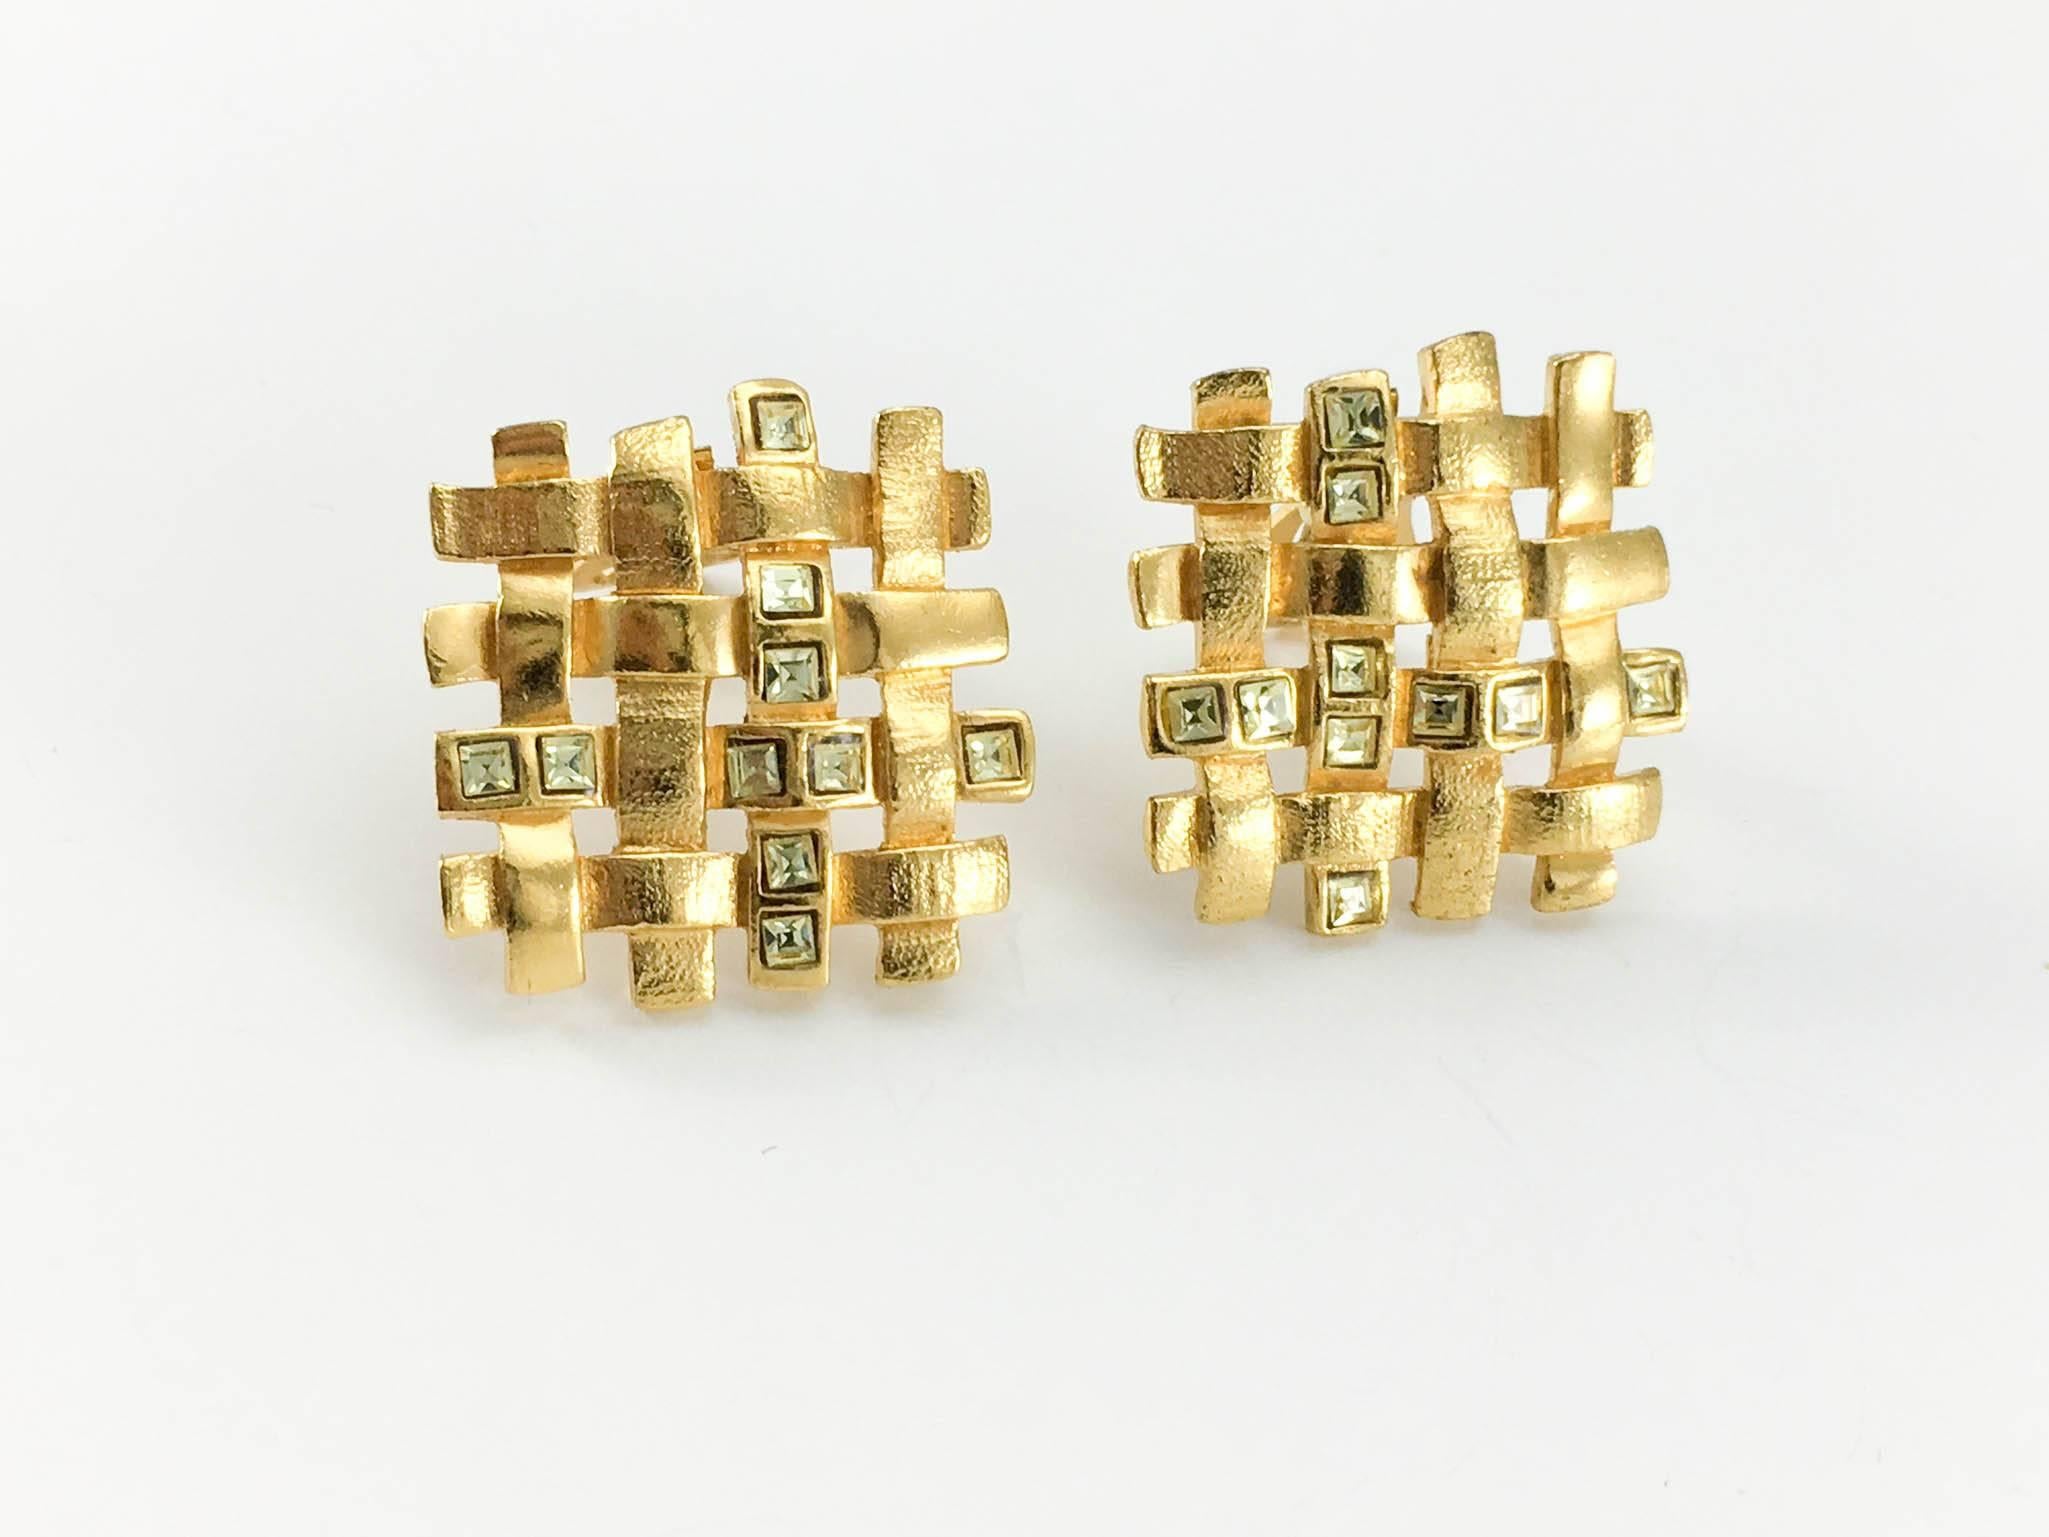 Vintage Yves Saint Laurent Gilt Clip-On Earrings with Crystals. These very pretty earrings by Yves Saint Laurent date back from the 1980's. In gilt base metal, the intricate design resembles woven fabric and features pale yellowy green paste /